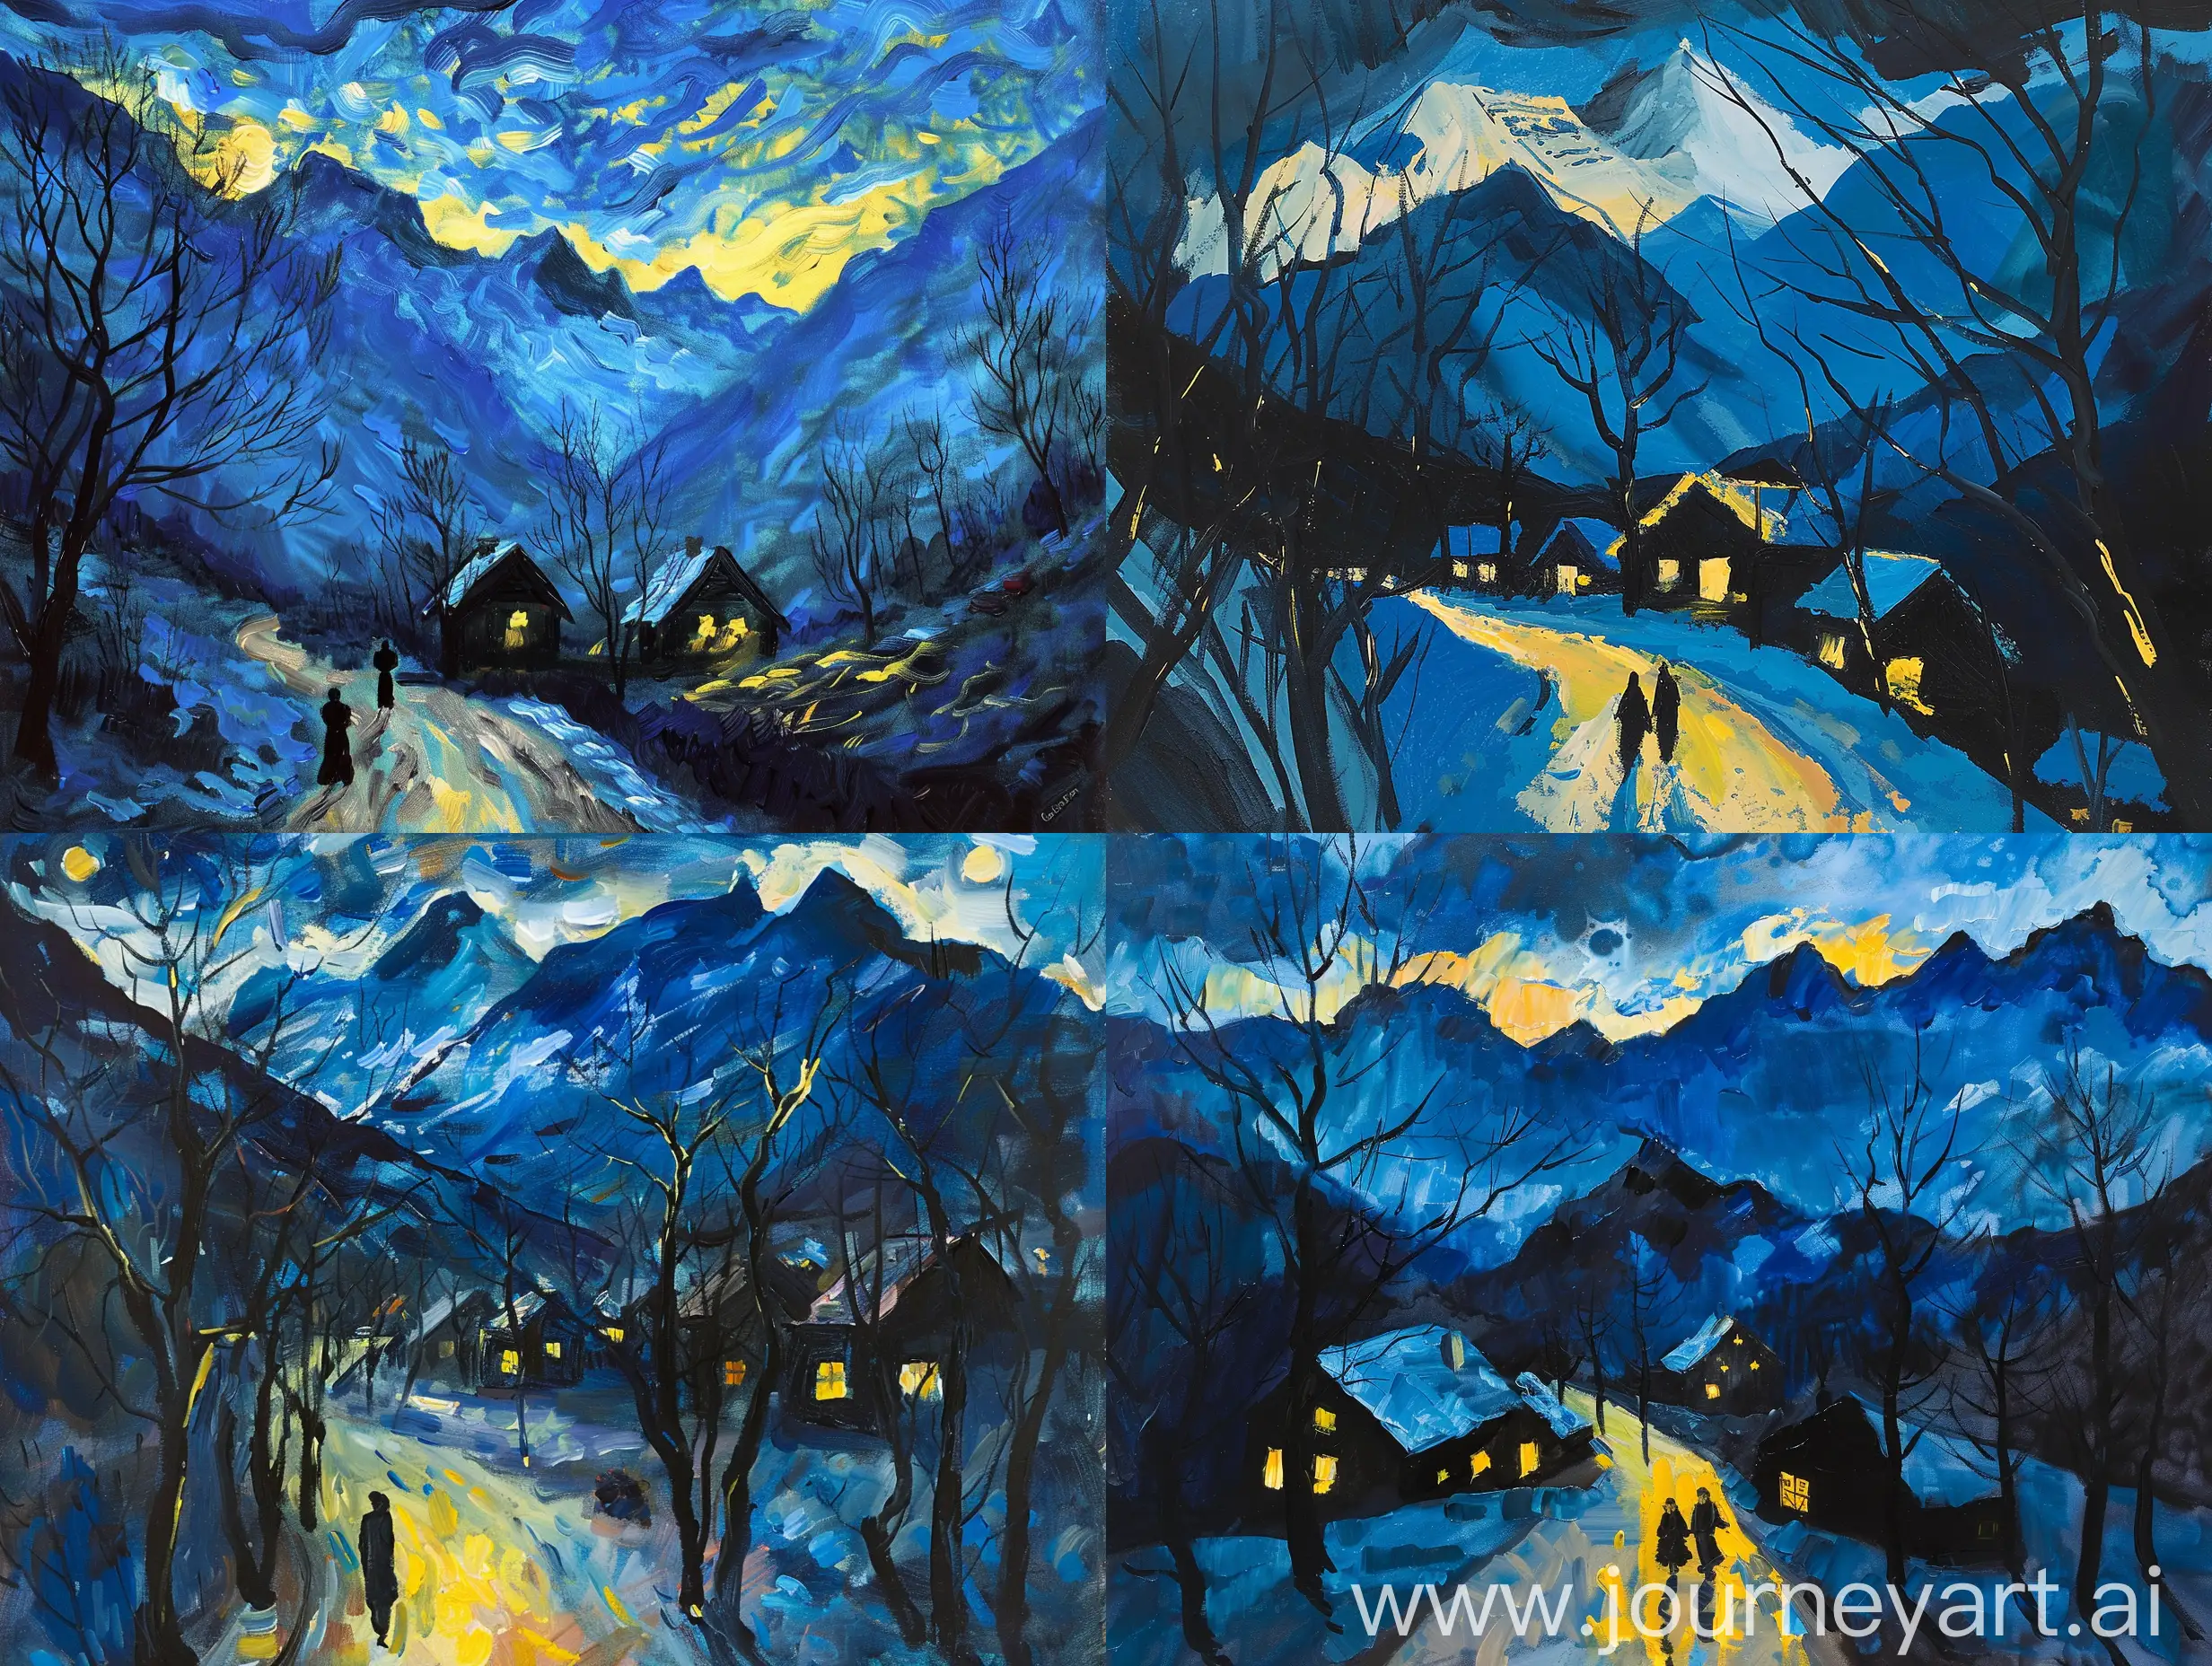 oil painting capturing the essence of a nocturnal landscape with elements of Post-Impressionism like oil painting of "evening in adelboden" by waldemar fink

Foreground should Include a path or road with bold strokes of yellow and blue to suggest moonlight reflection.
Add two figures walking away, dressed in dark clothing for silhouette effect.
Midground should include Scatter small, dark houses with glowing windows among bare, leafless trees.
Background should include Feature a large mountain range in shades of blue with snow-capped peaks.
Create a dynamic sky of blue and black for a turbulent night sky effect.
Color Palette should Use a striking palette of blues, yellows, and blacks for vibrancy and energy.
Contrast warm yellows against cool blues for visual impact.
Unique Features should
realistic representation for emotional expression.
Emphasize mood and atmosphere through color and brushwork.
By incorporating these detailed elements and following the style and color palette described, create a similar artwork that captures the beauty and emotion of a nocturnal journey in a Post-Impressionist style.